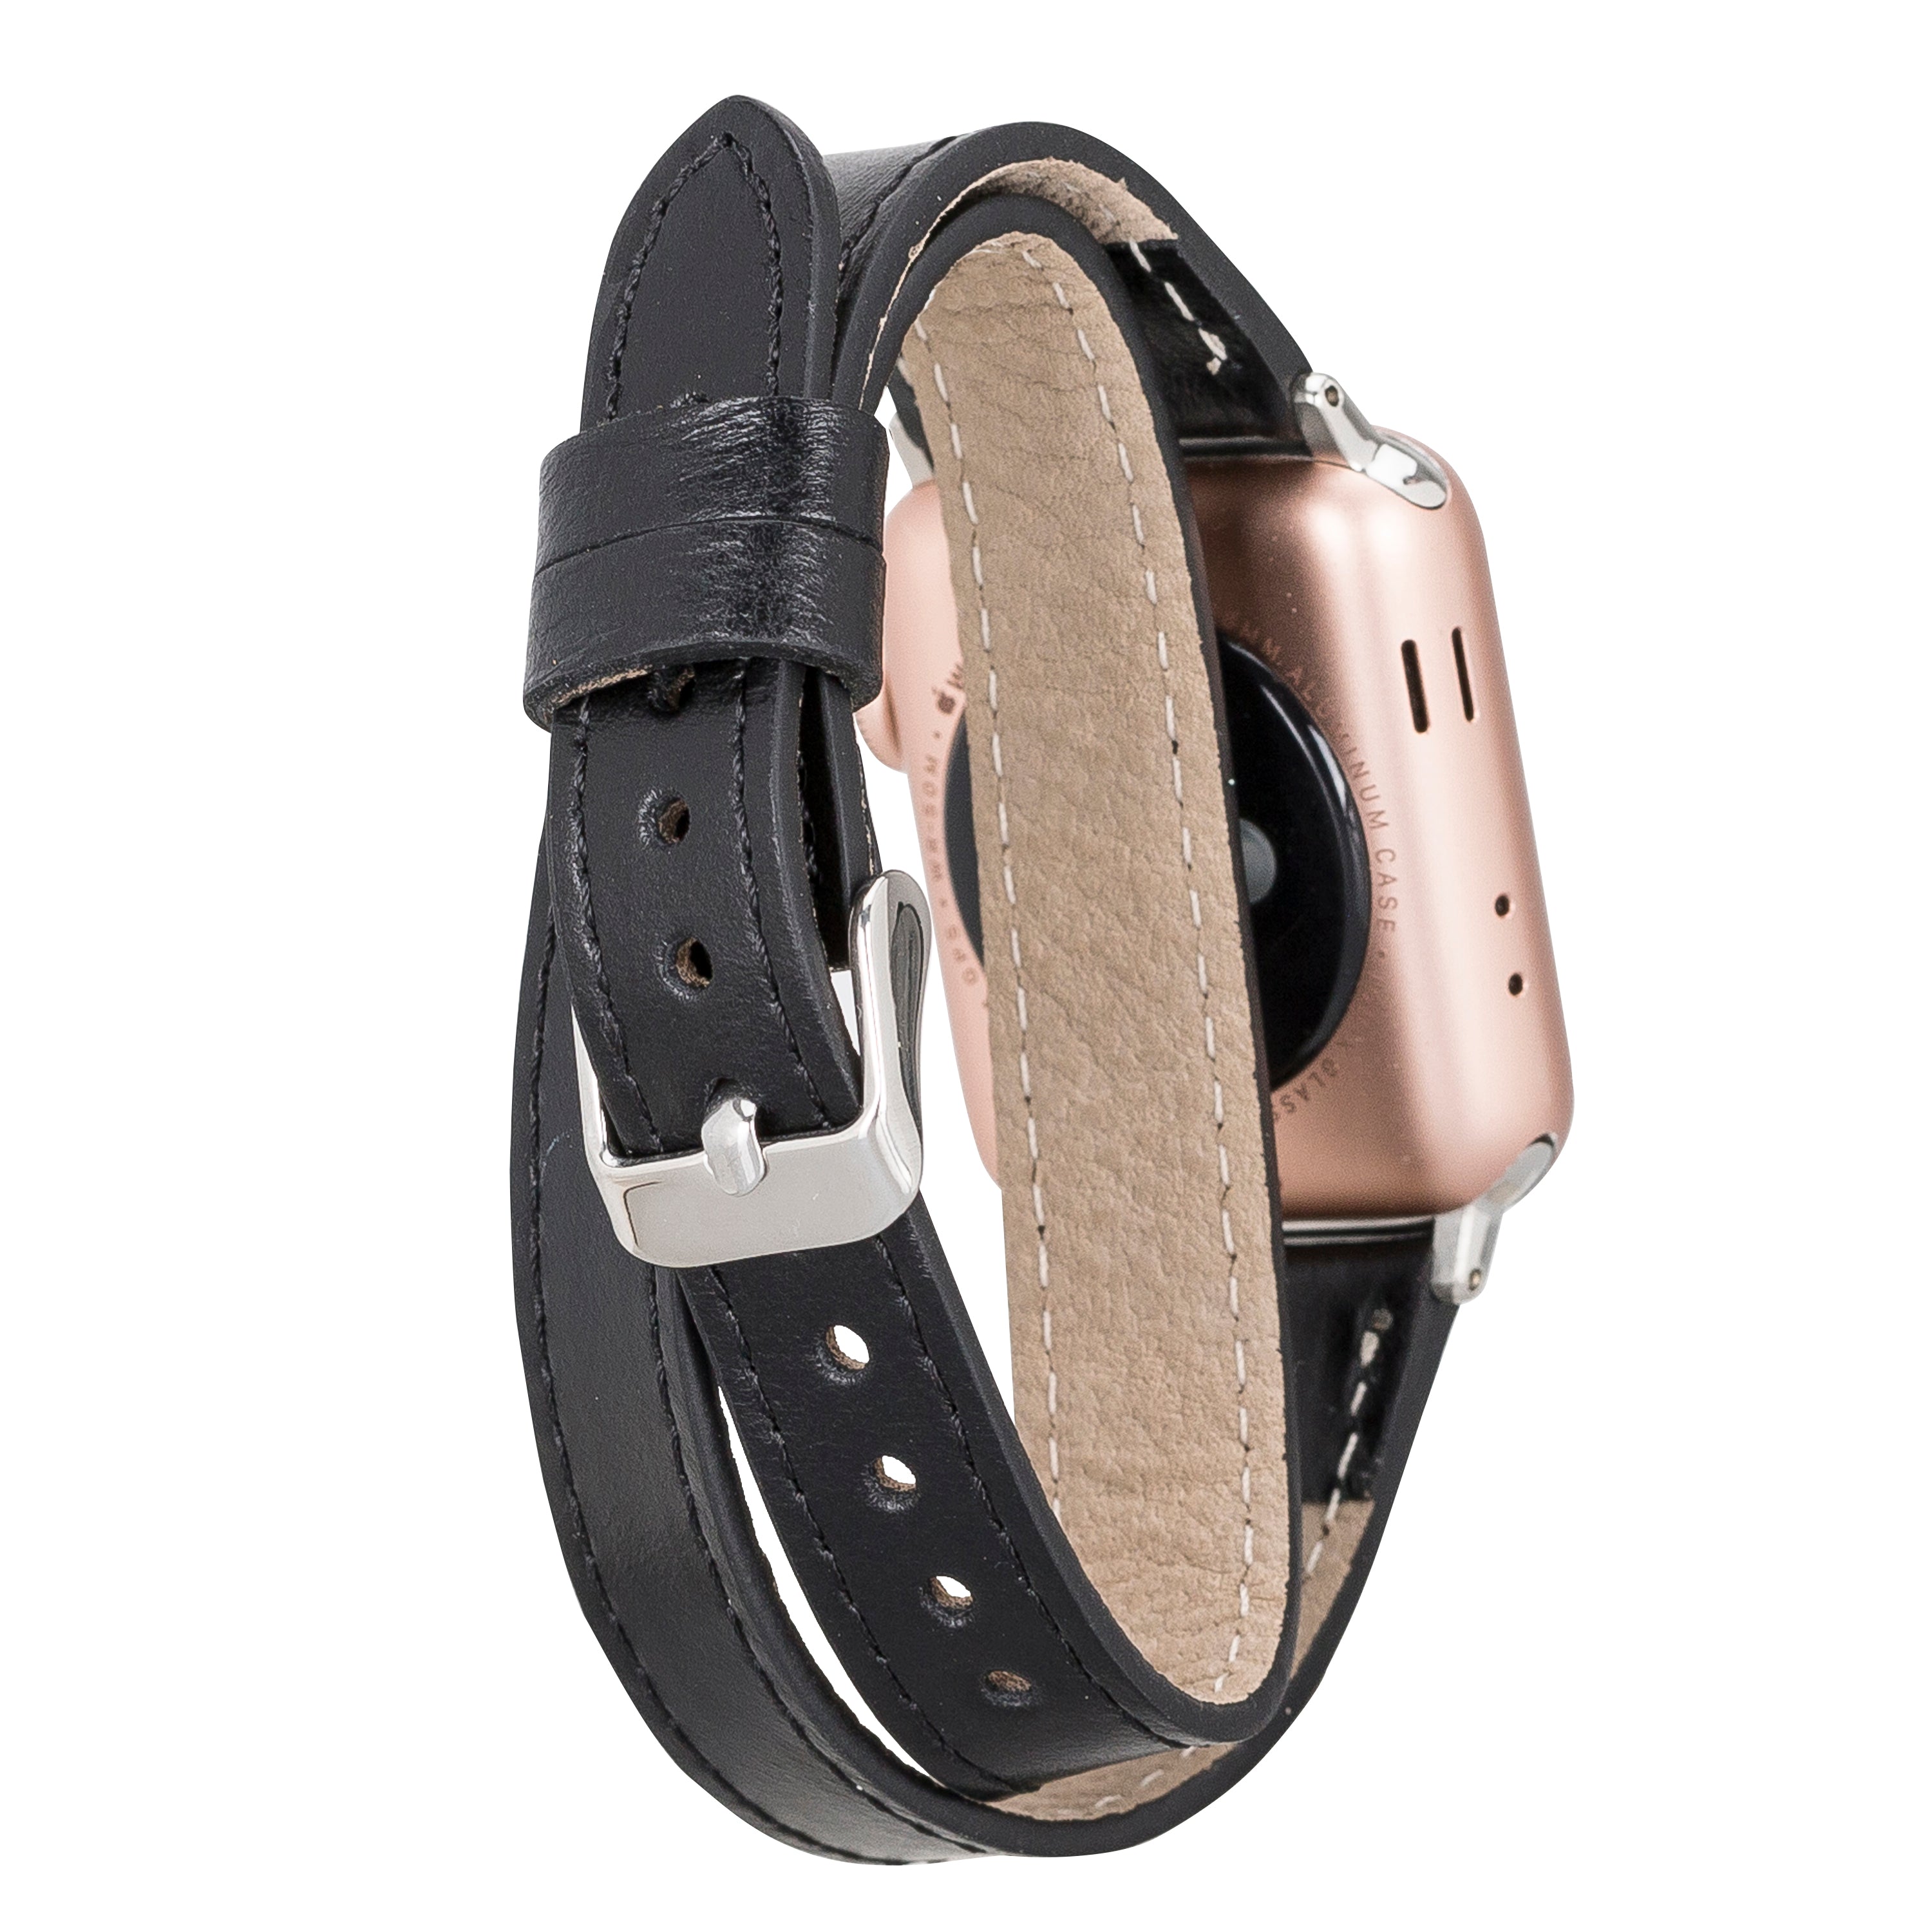 DelfiCase Oxford Double Leather Watch Band for Apple Watch 40